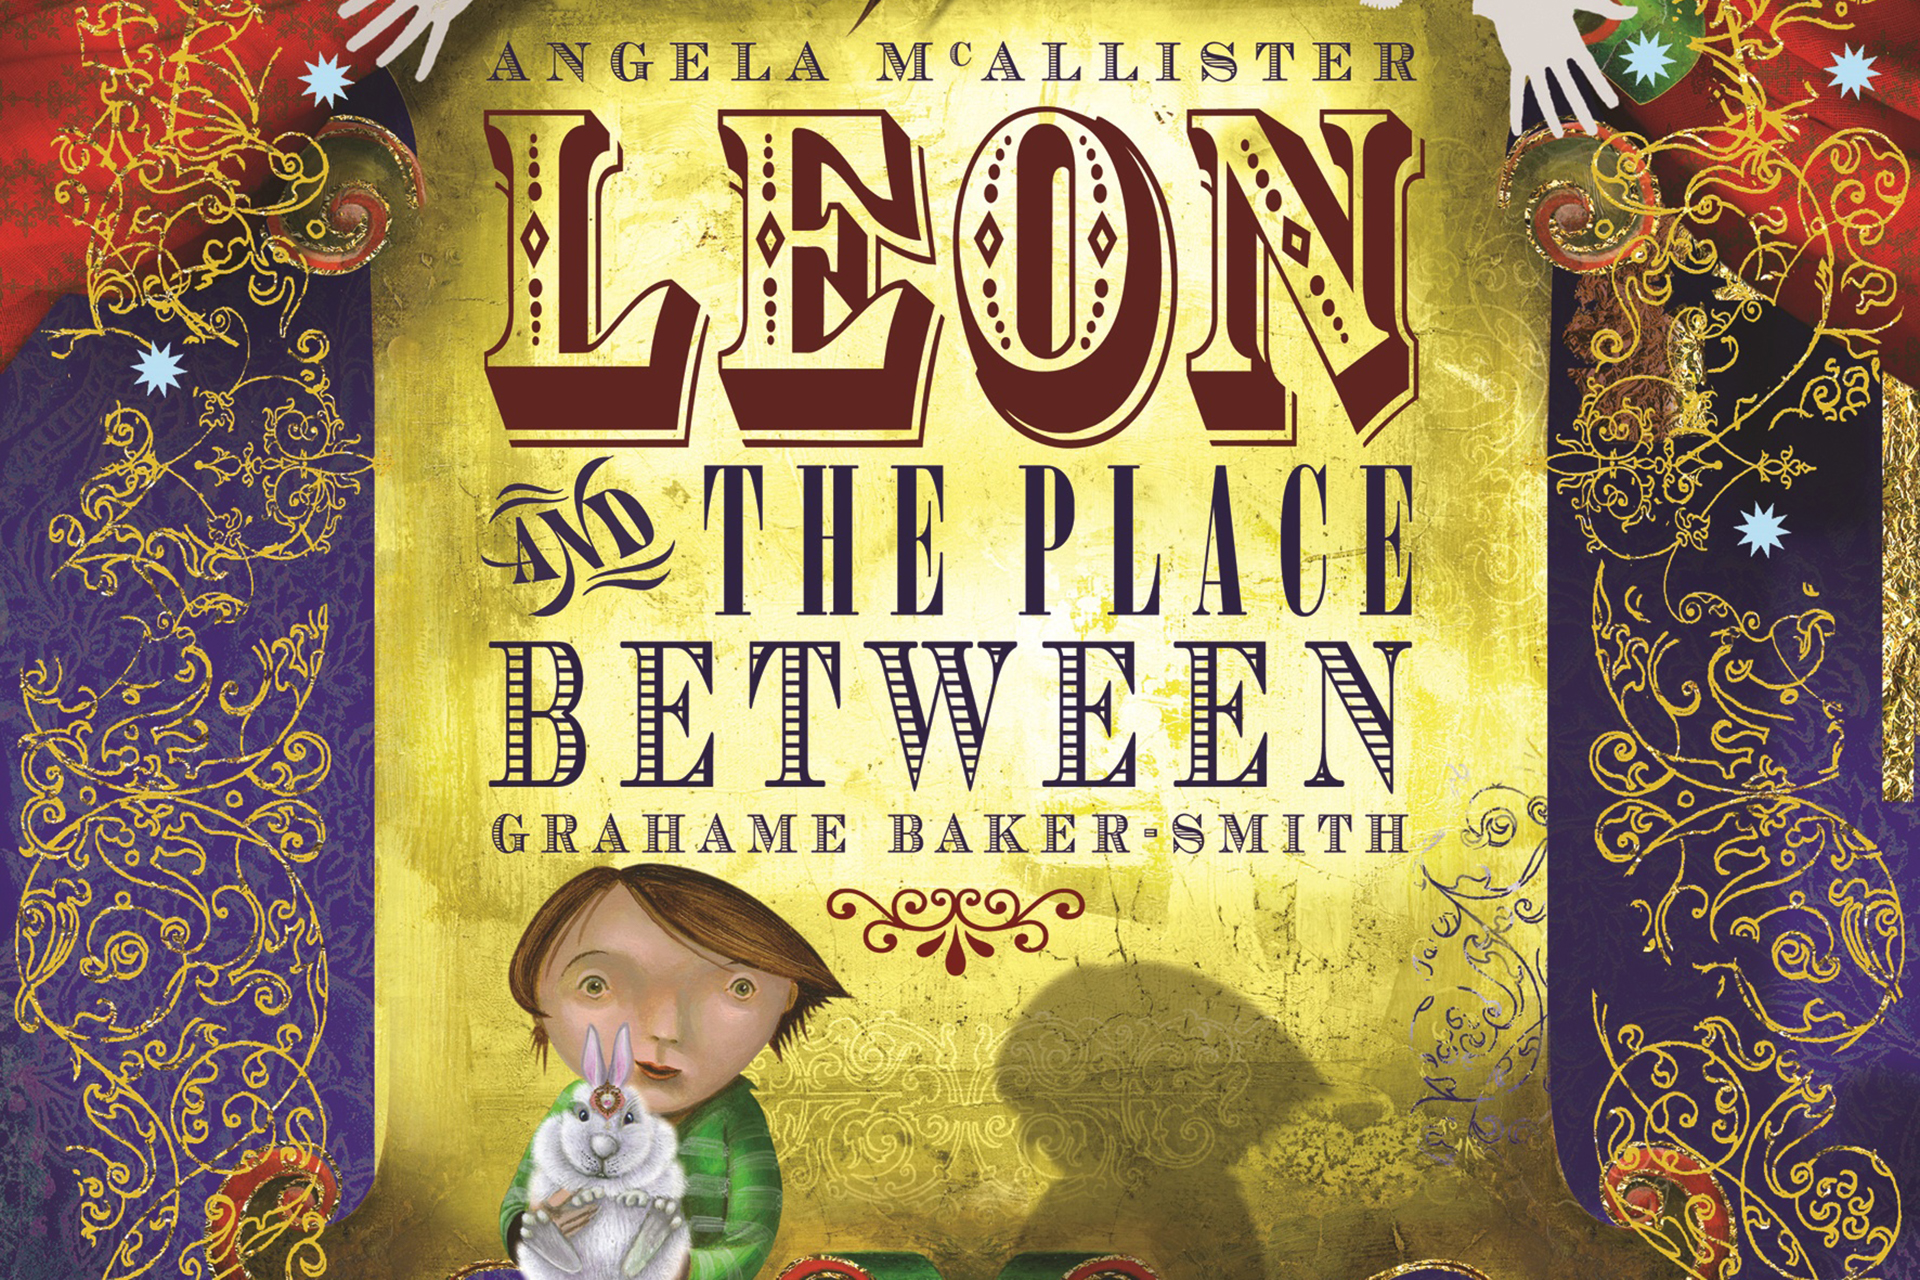 Leon & The Place Between – Adelaide